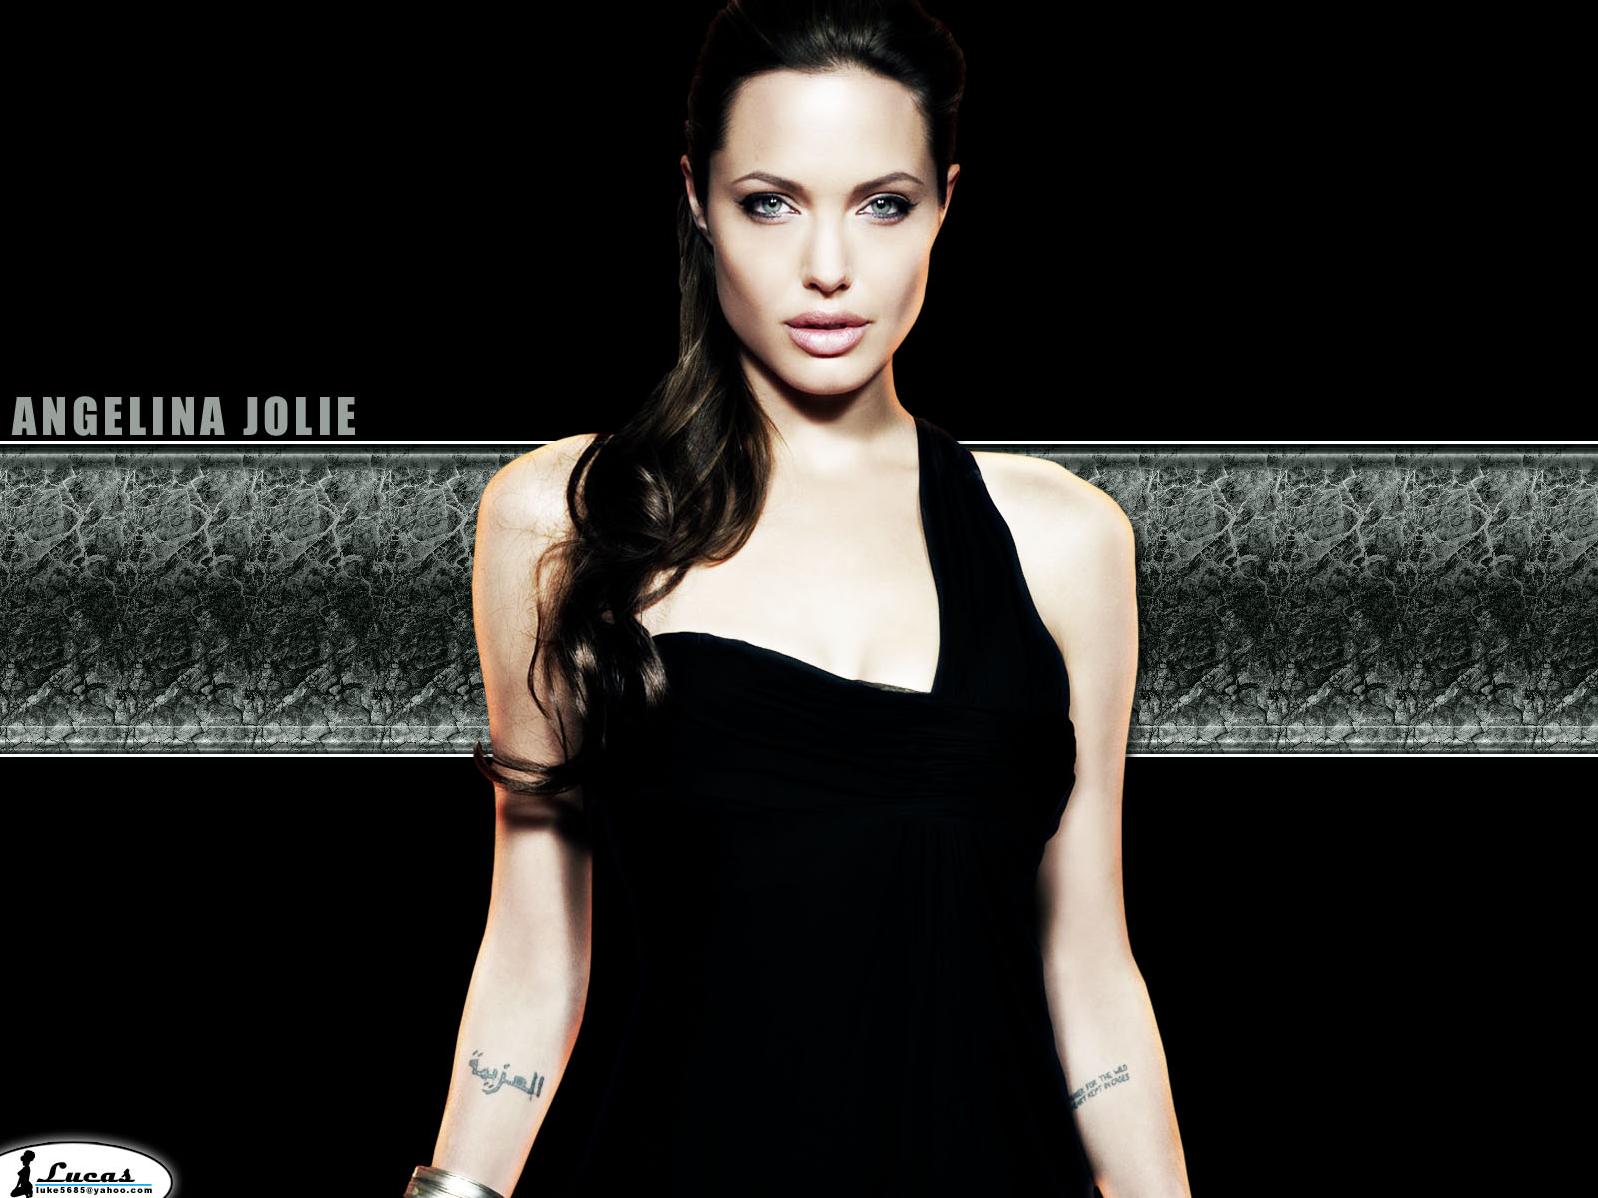 Angelina Jolie Fashion. The charismatic goddess ANGELINA JOLIE no longer goes for the punk or goth 